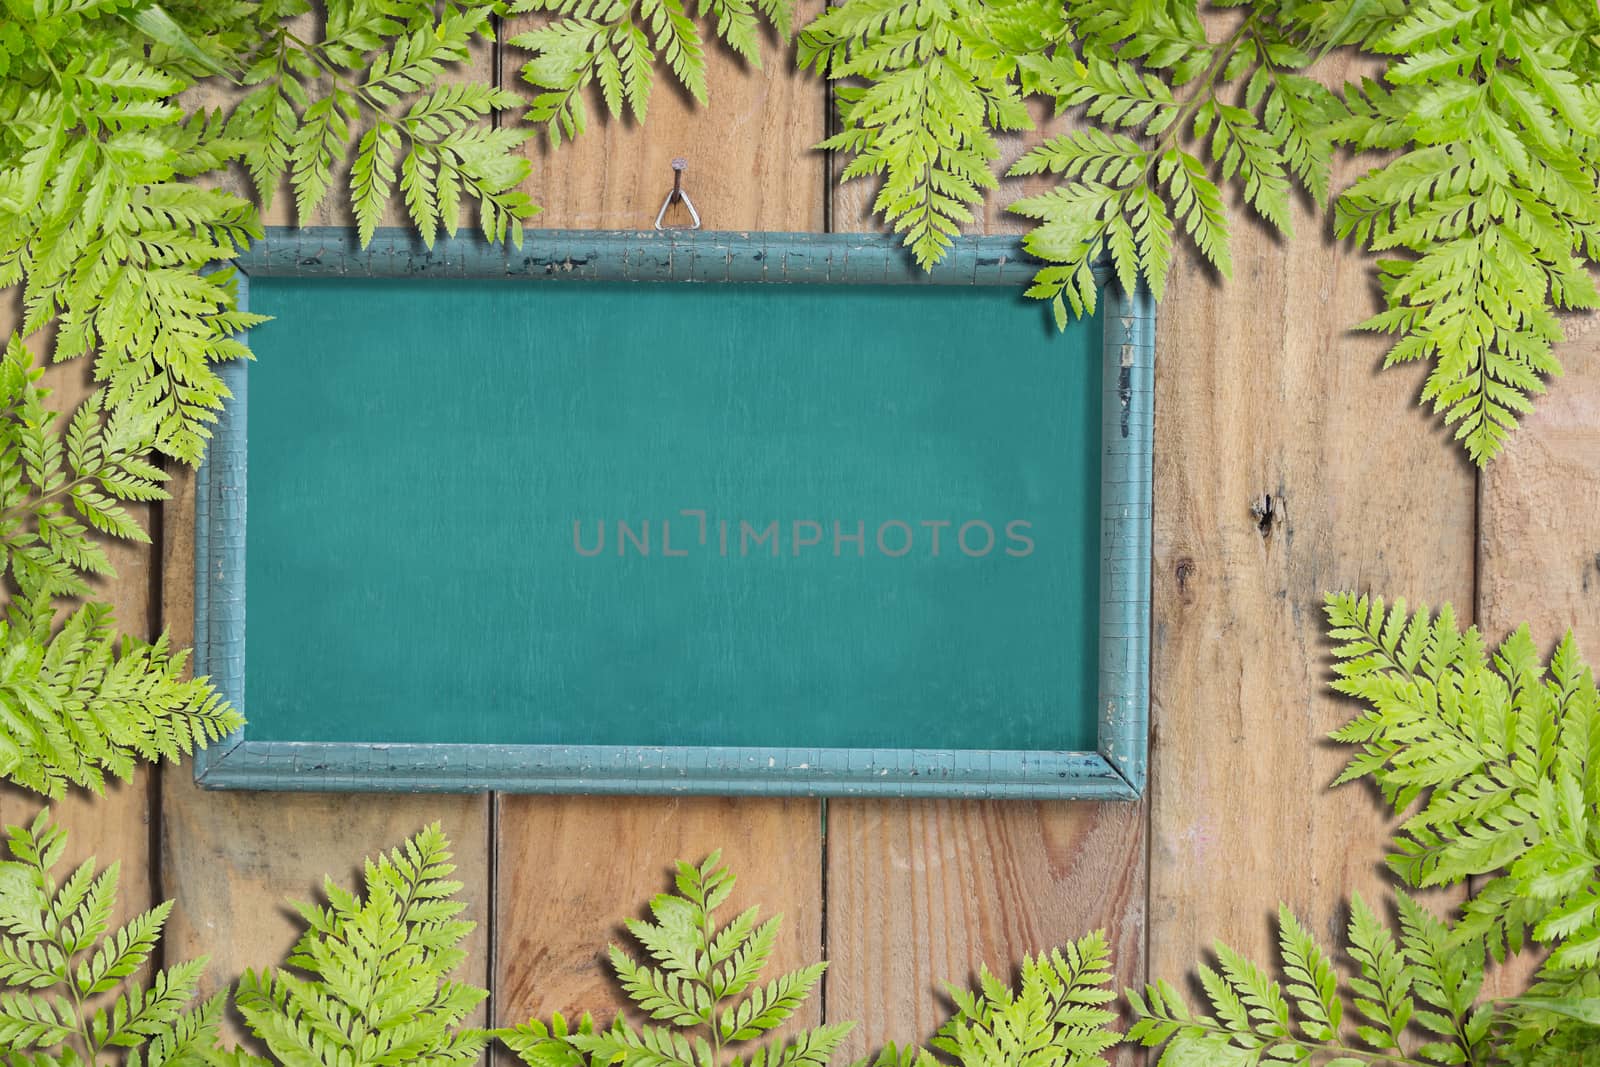 Green Leaves On Old Vintage Wooden Photo Frame On Wooden Wall by rakoptonLPN